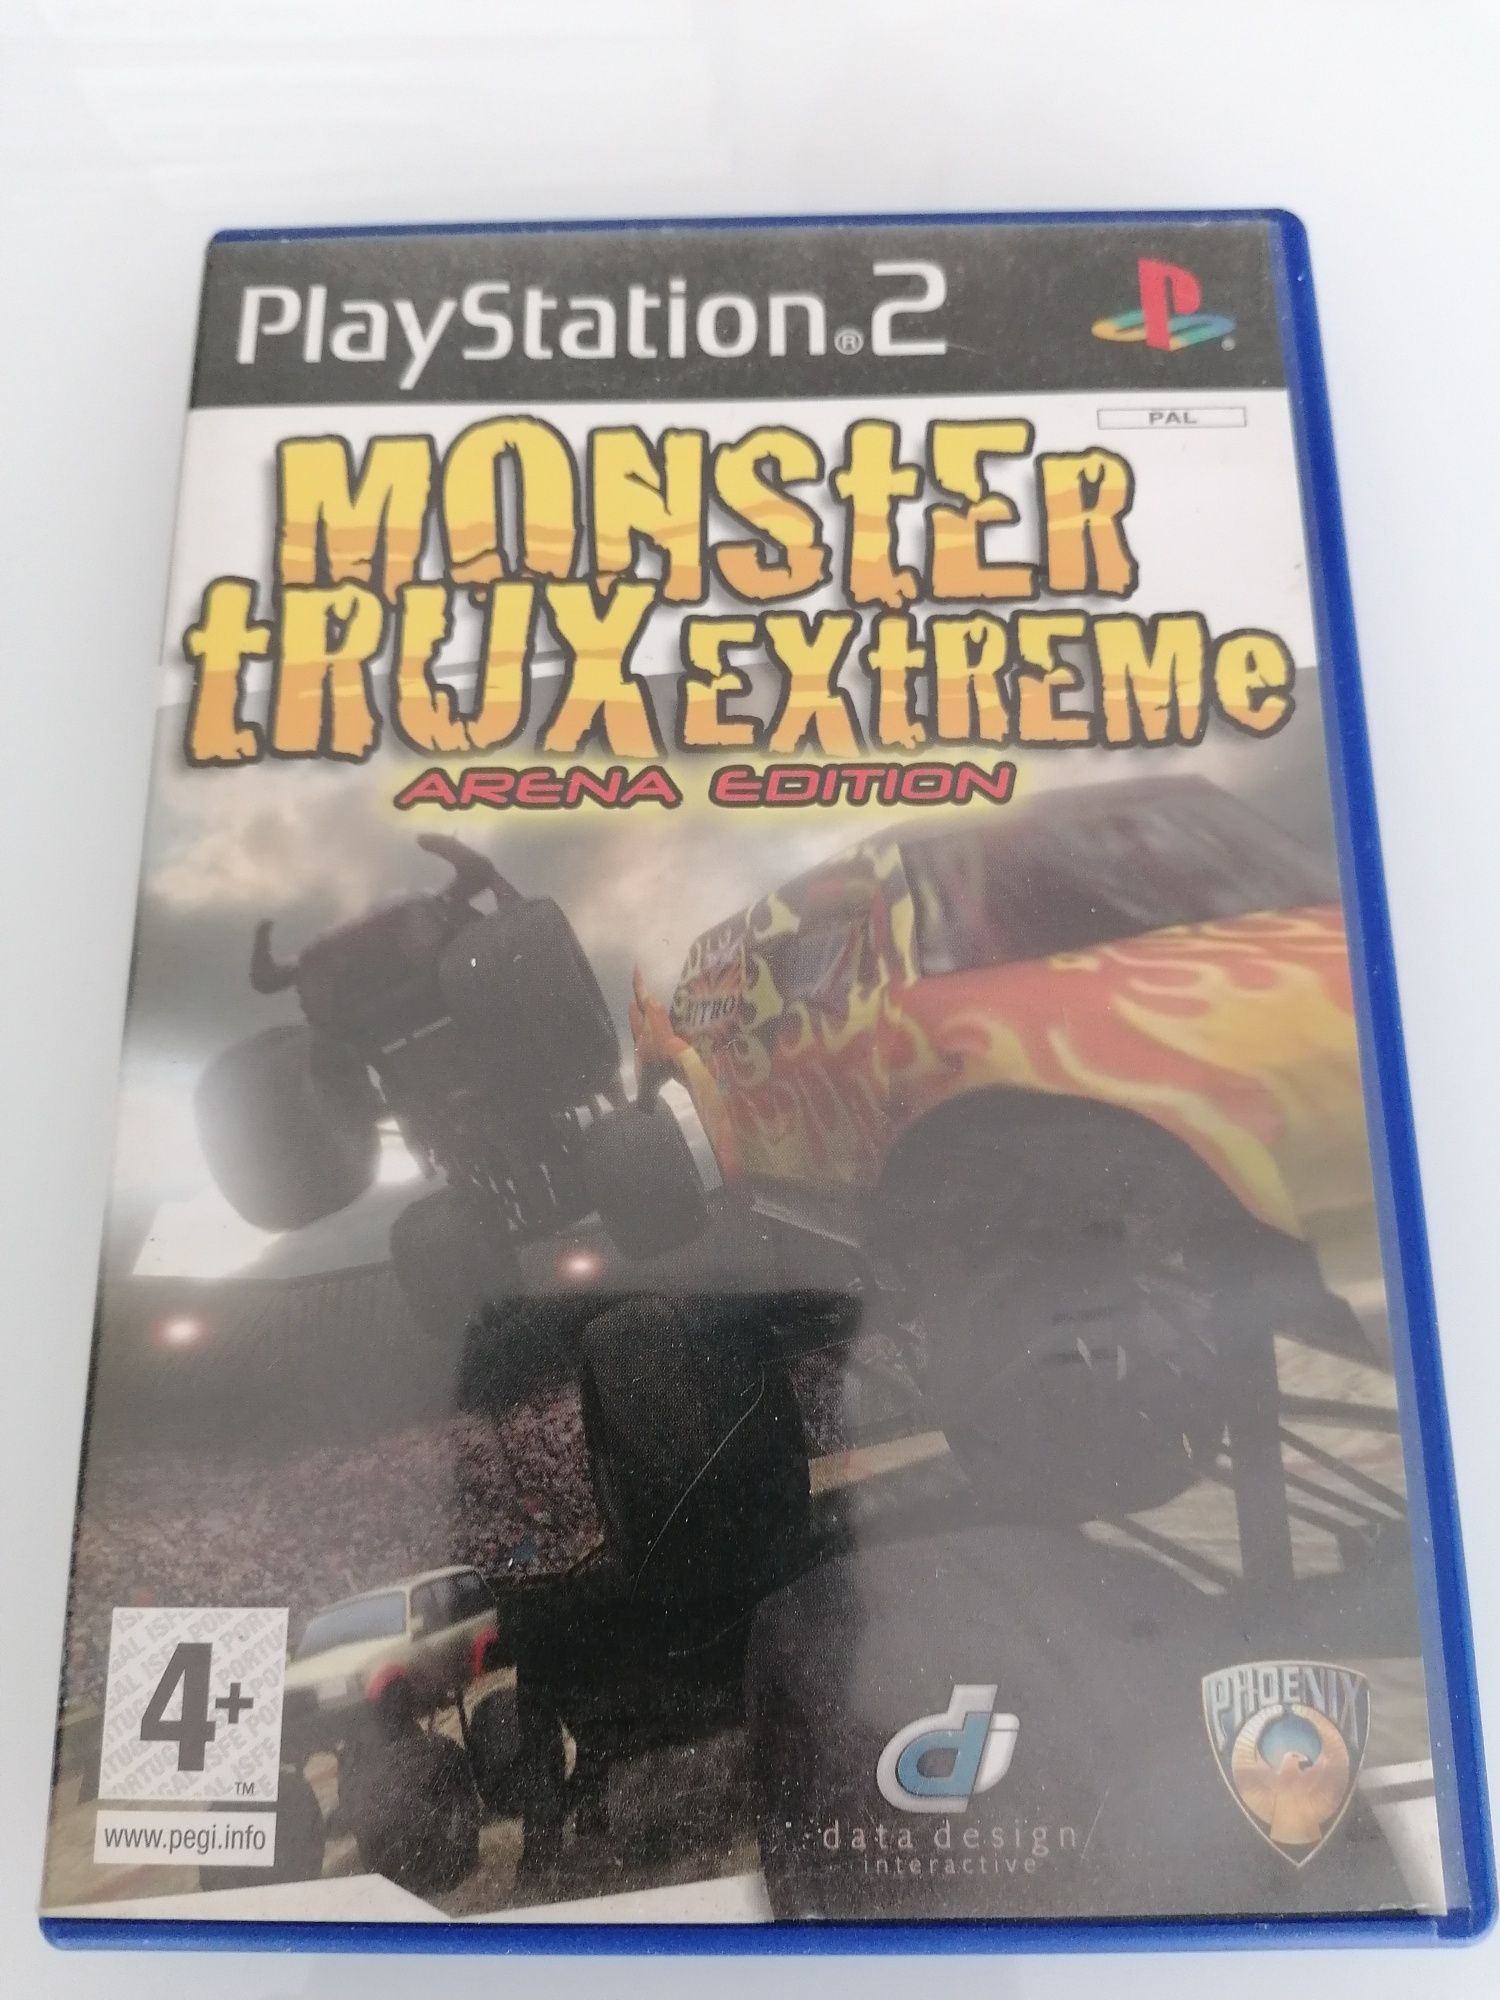 Ps2 monster trux extreme arena edition